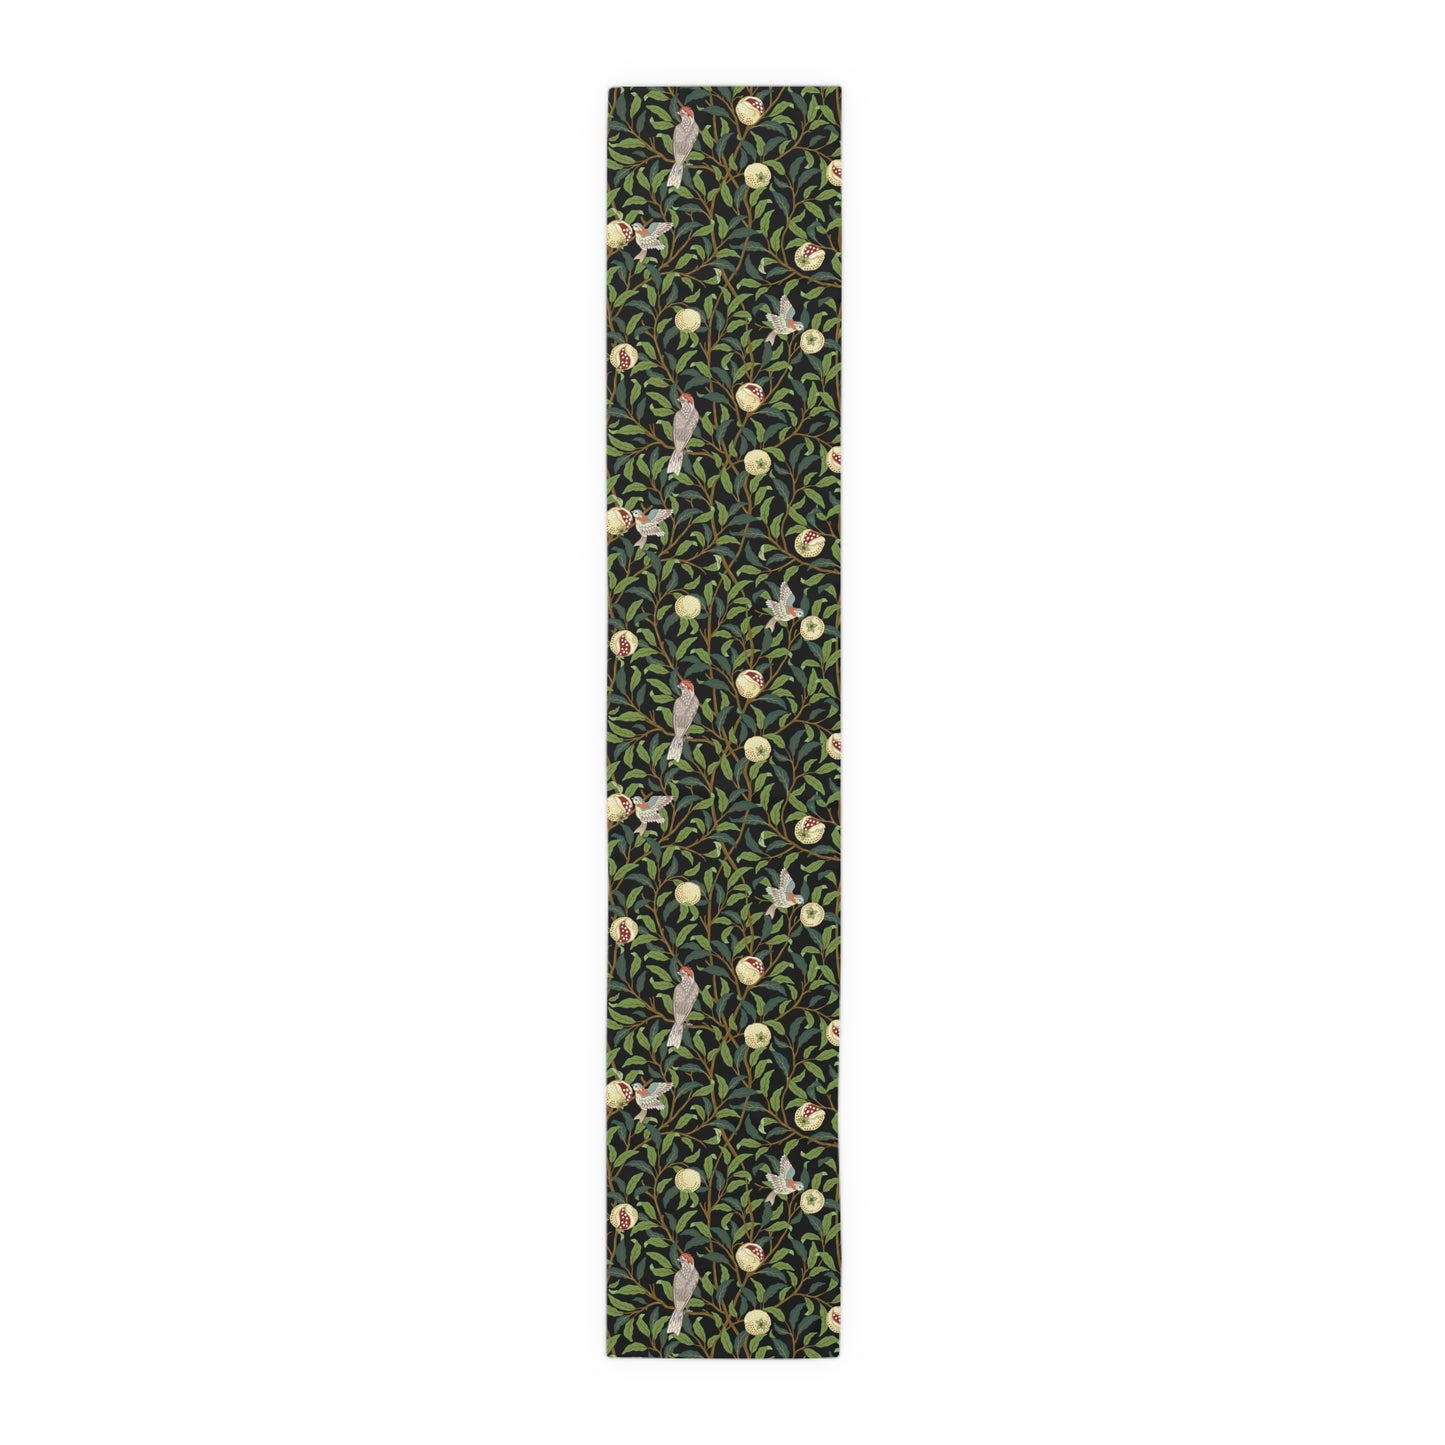 William Morris & Co Table Runner - Bird and Pomegranate Collection (Onyx)